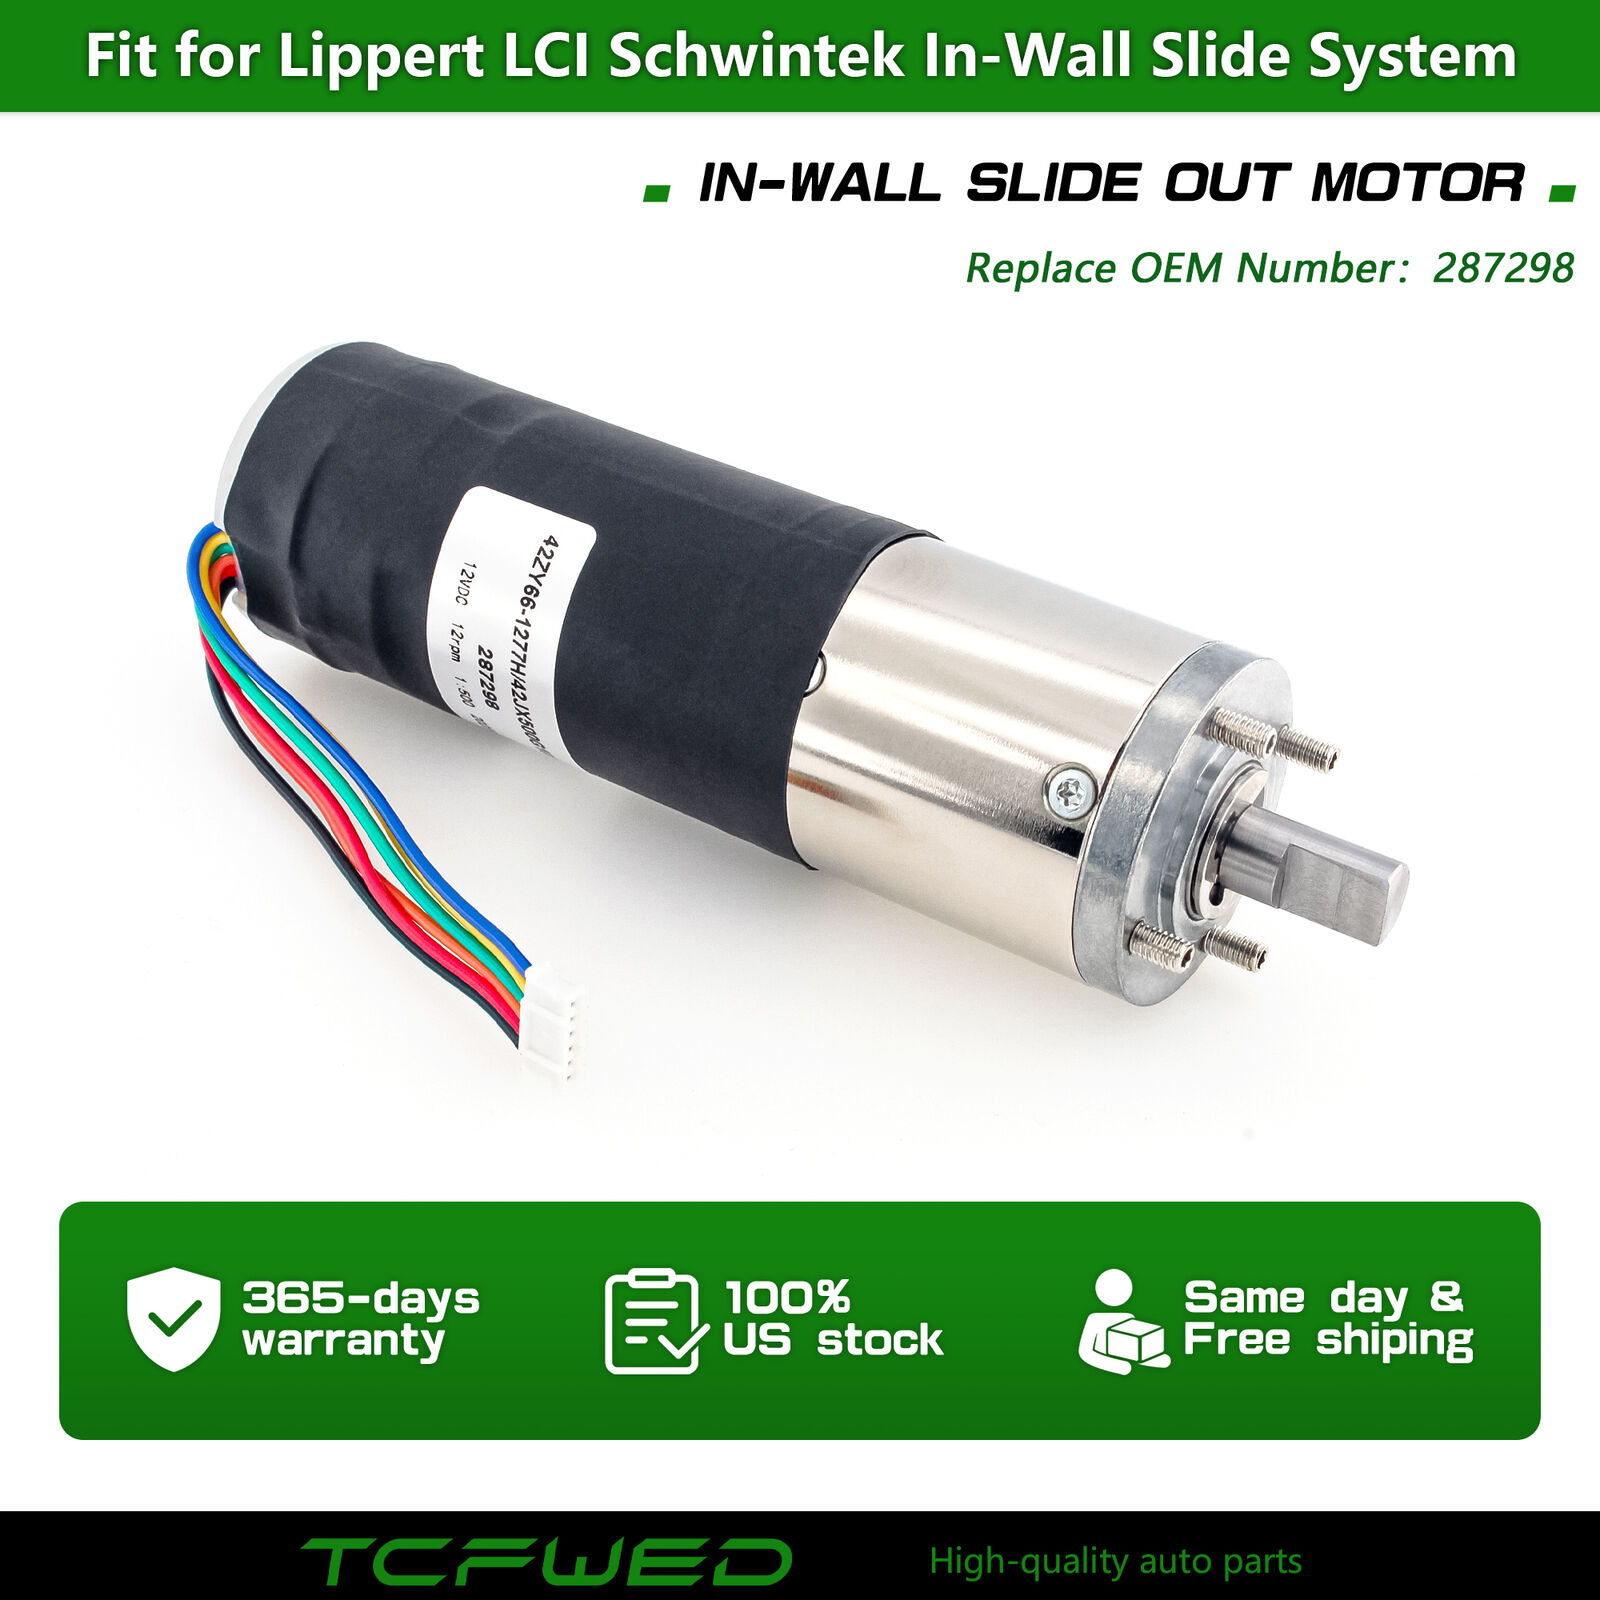 Lippert Components 287298 LCI 12VDC IN-WALL SLIDE OUT Motor 500:1 Replace Kit